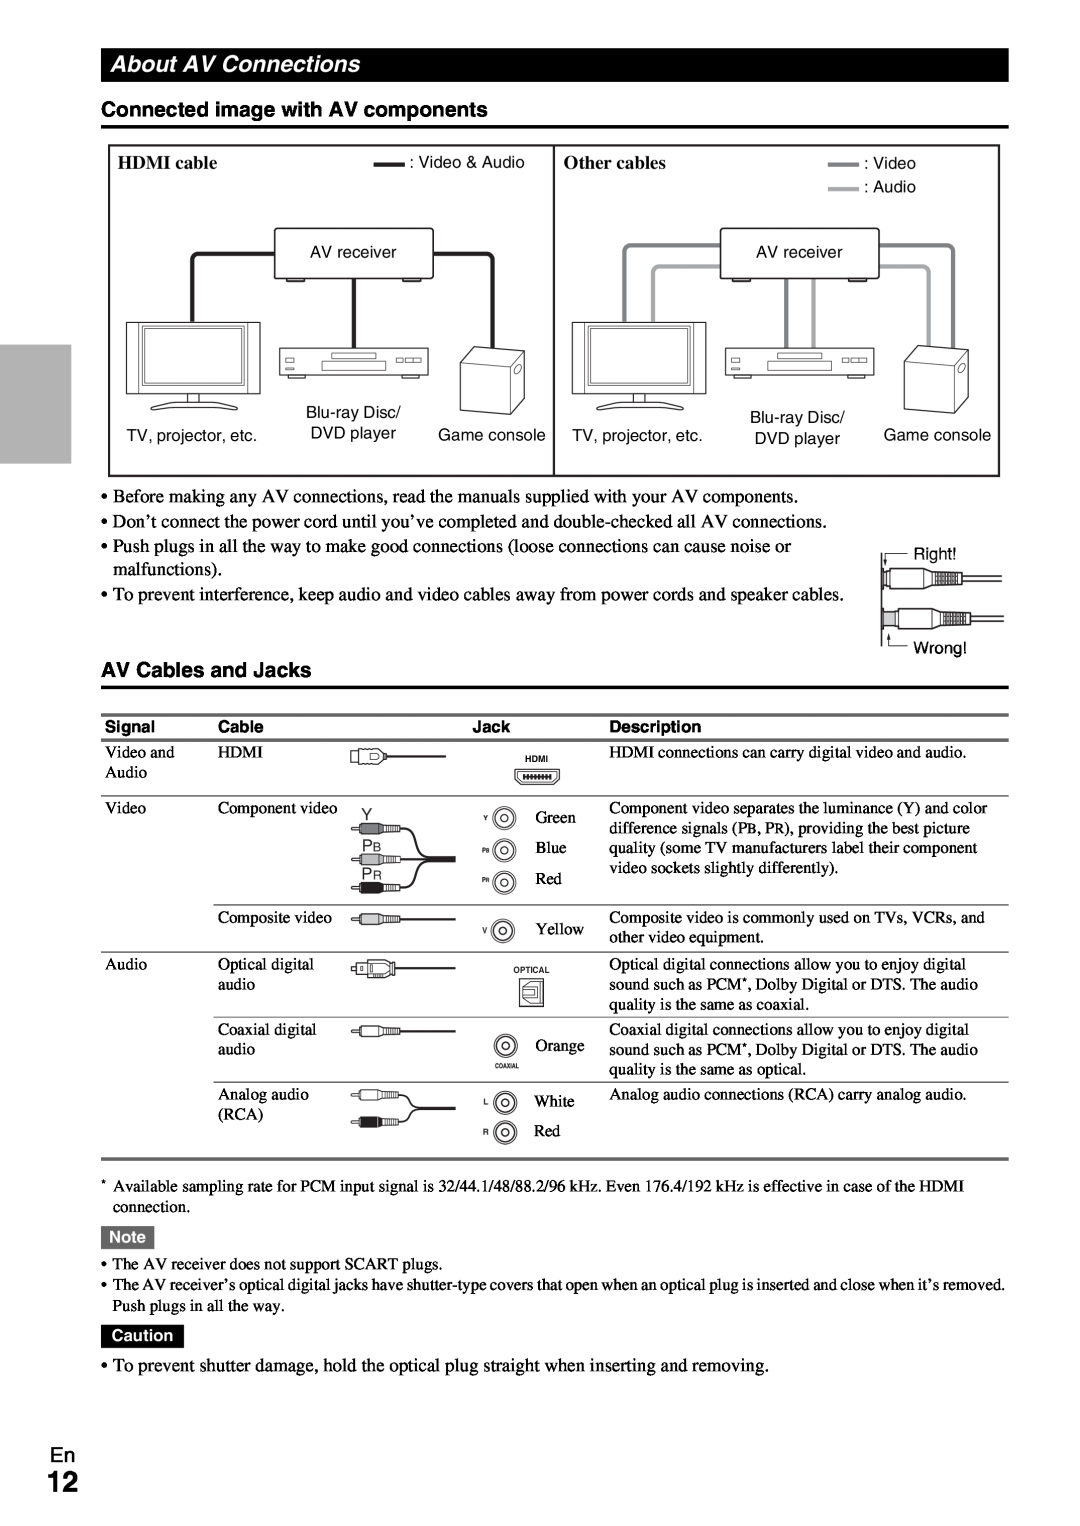 Onkyo TX-SR309 instruction manual About AV Connections, Connected image with AV components, AV Cables and Jacks 